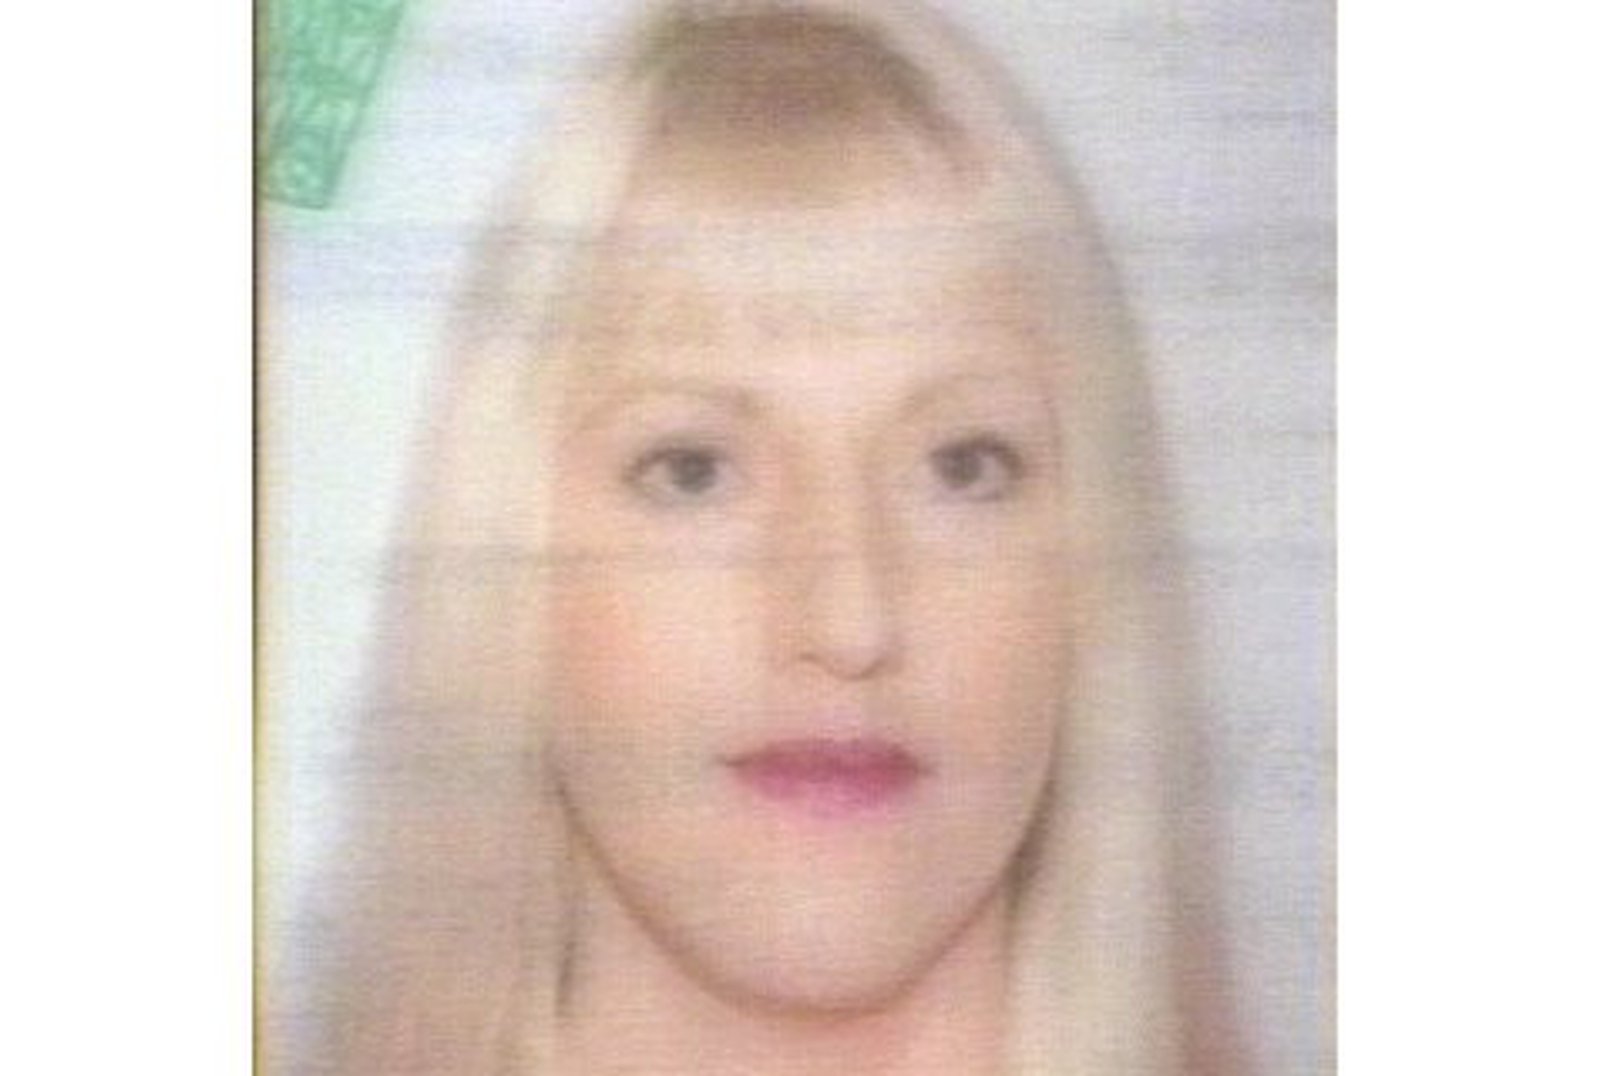 Rising Concern For Missing Waterford Woman